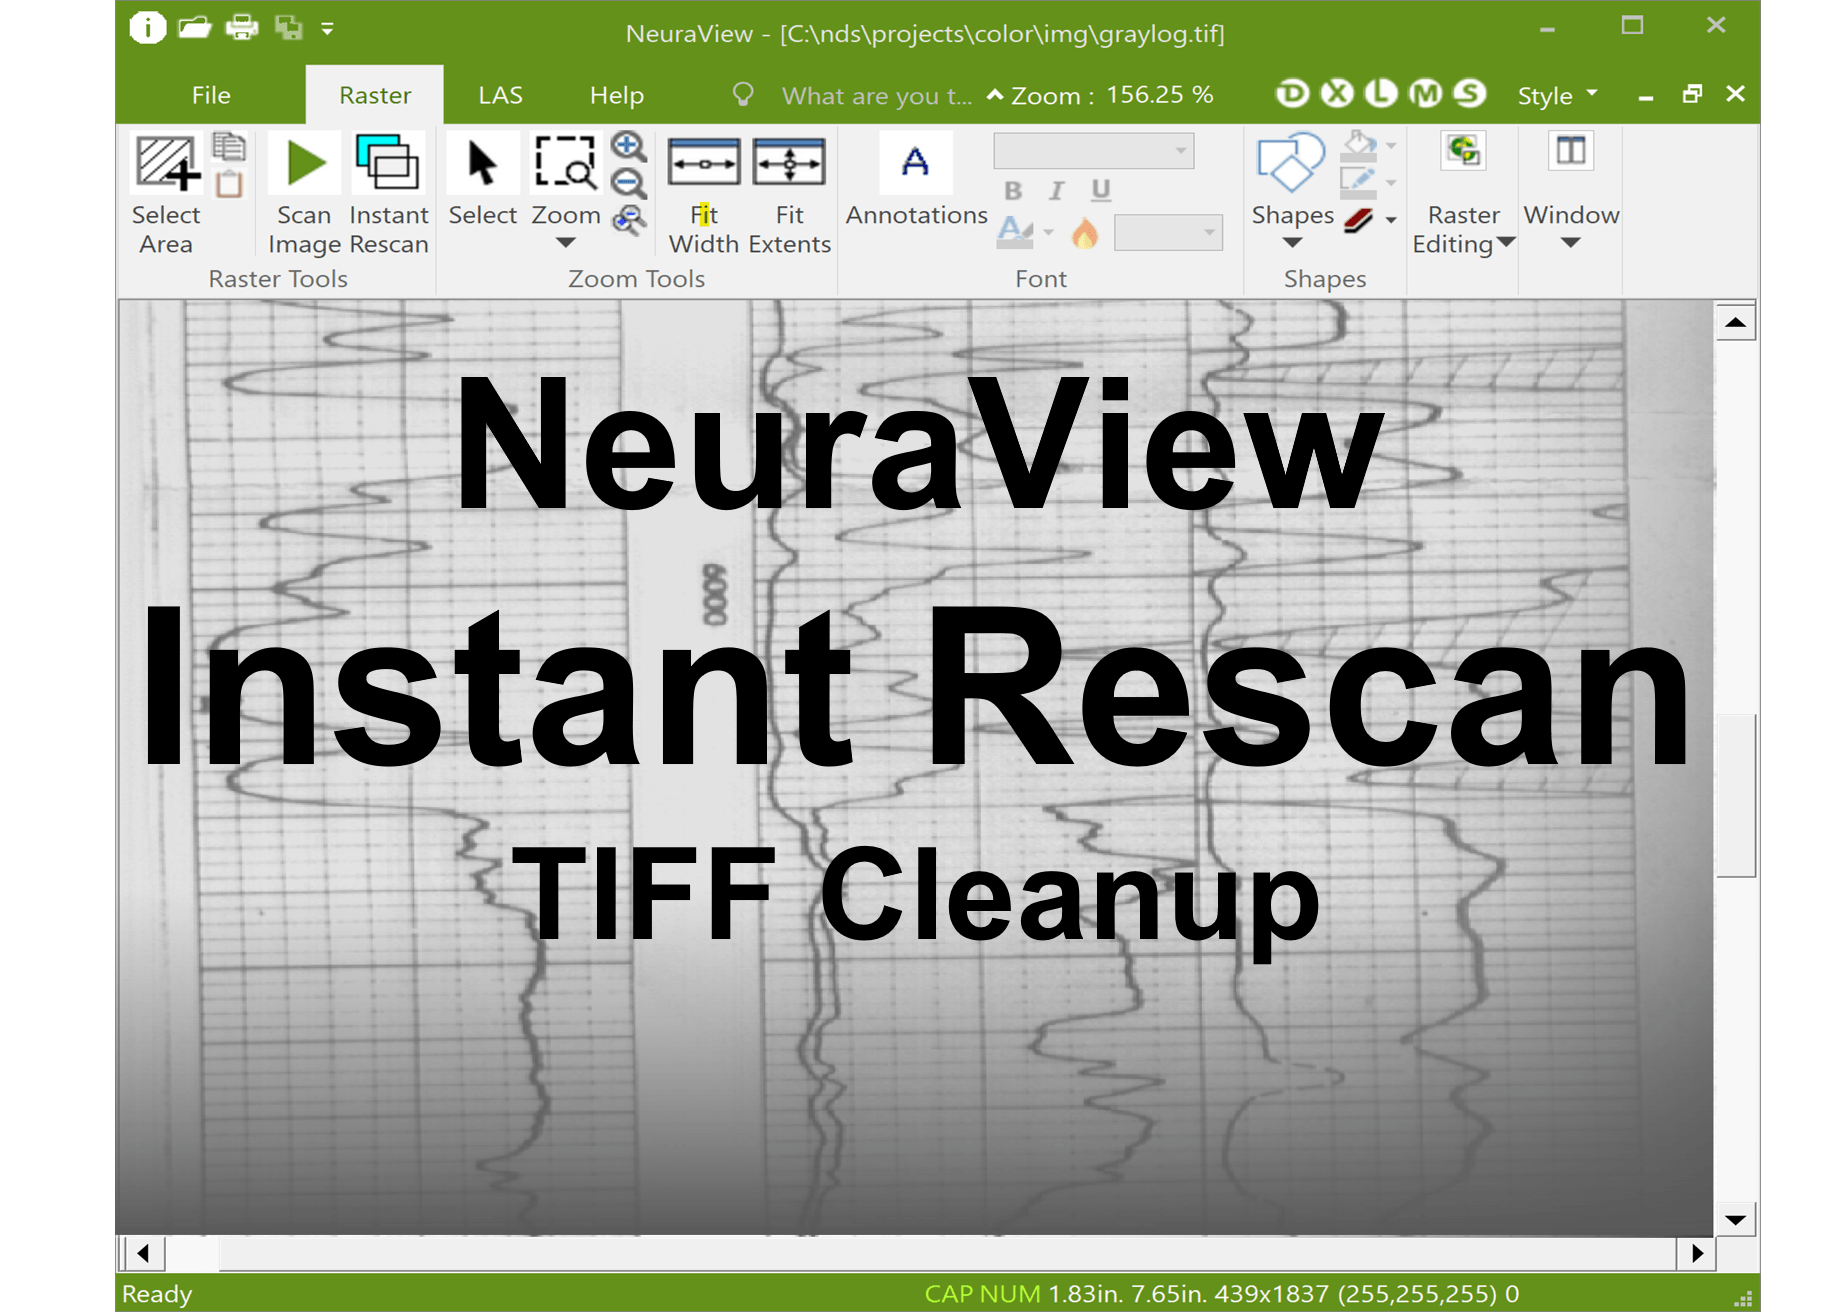 NeuraView Instant Rescan #1 TIFF Cleanup Tool